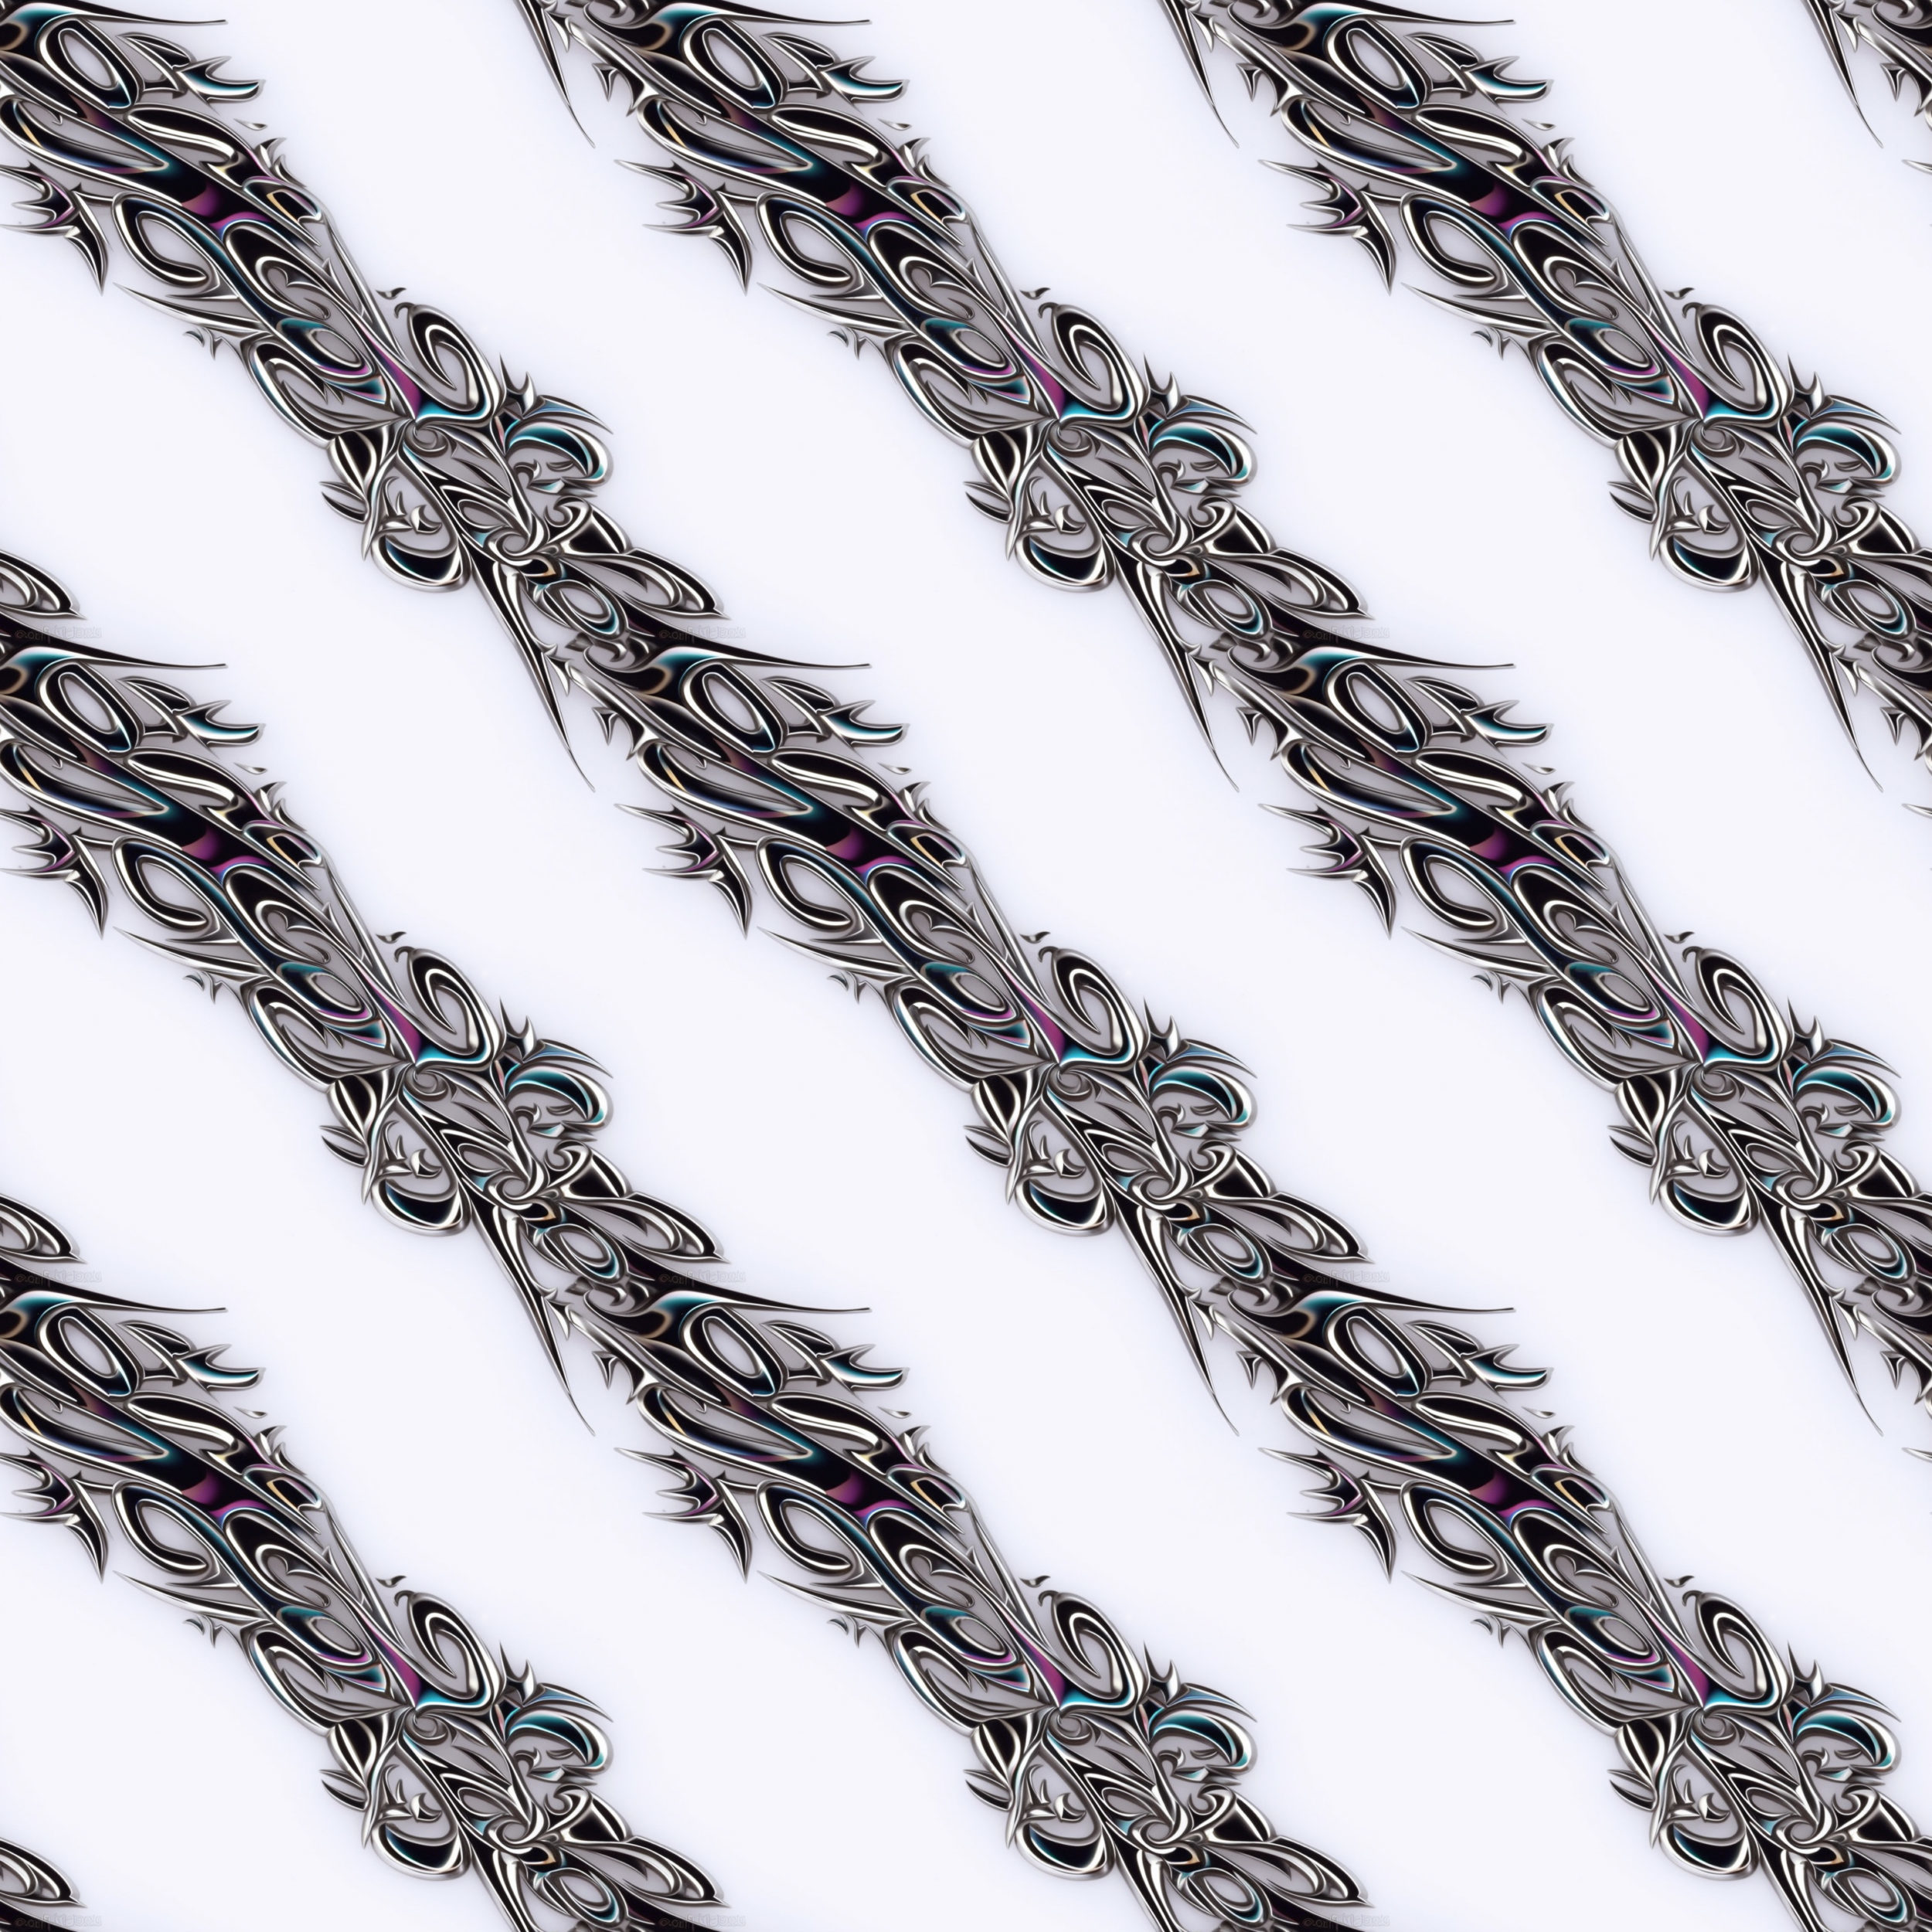 Free Repeating Chrome Tribal Patterns - High-Quality Design Resources for Non-Commercial Use